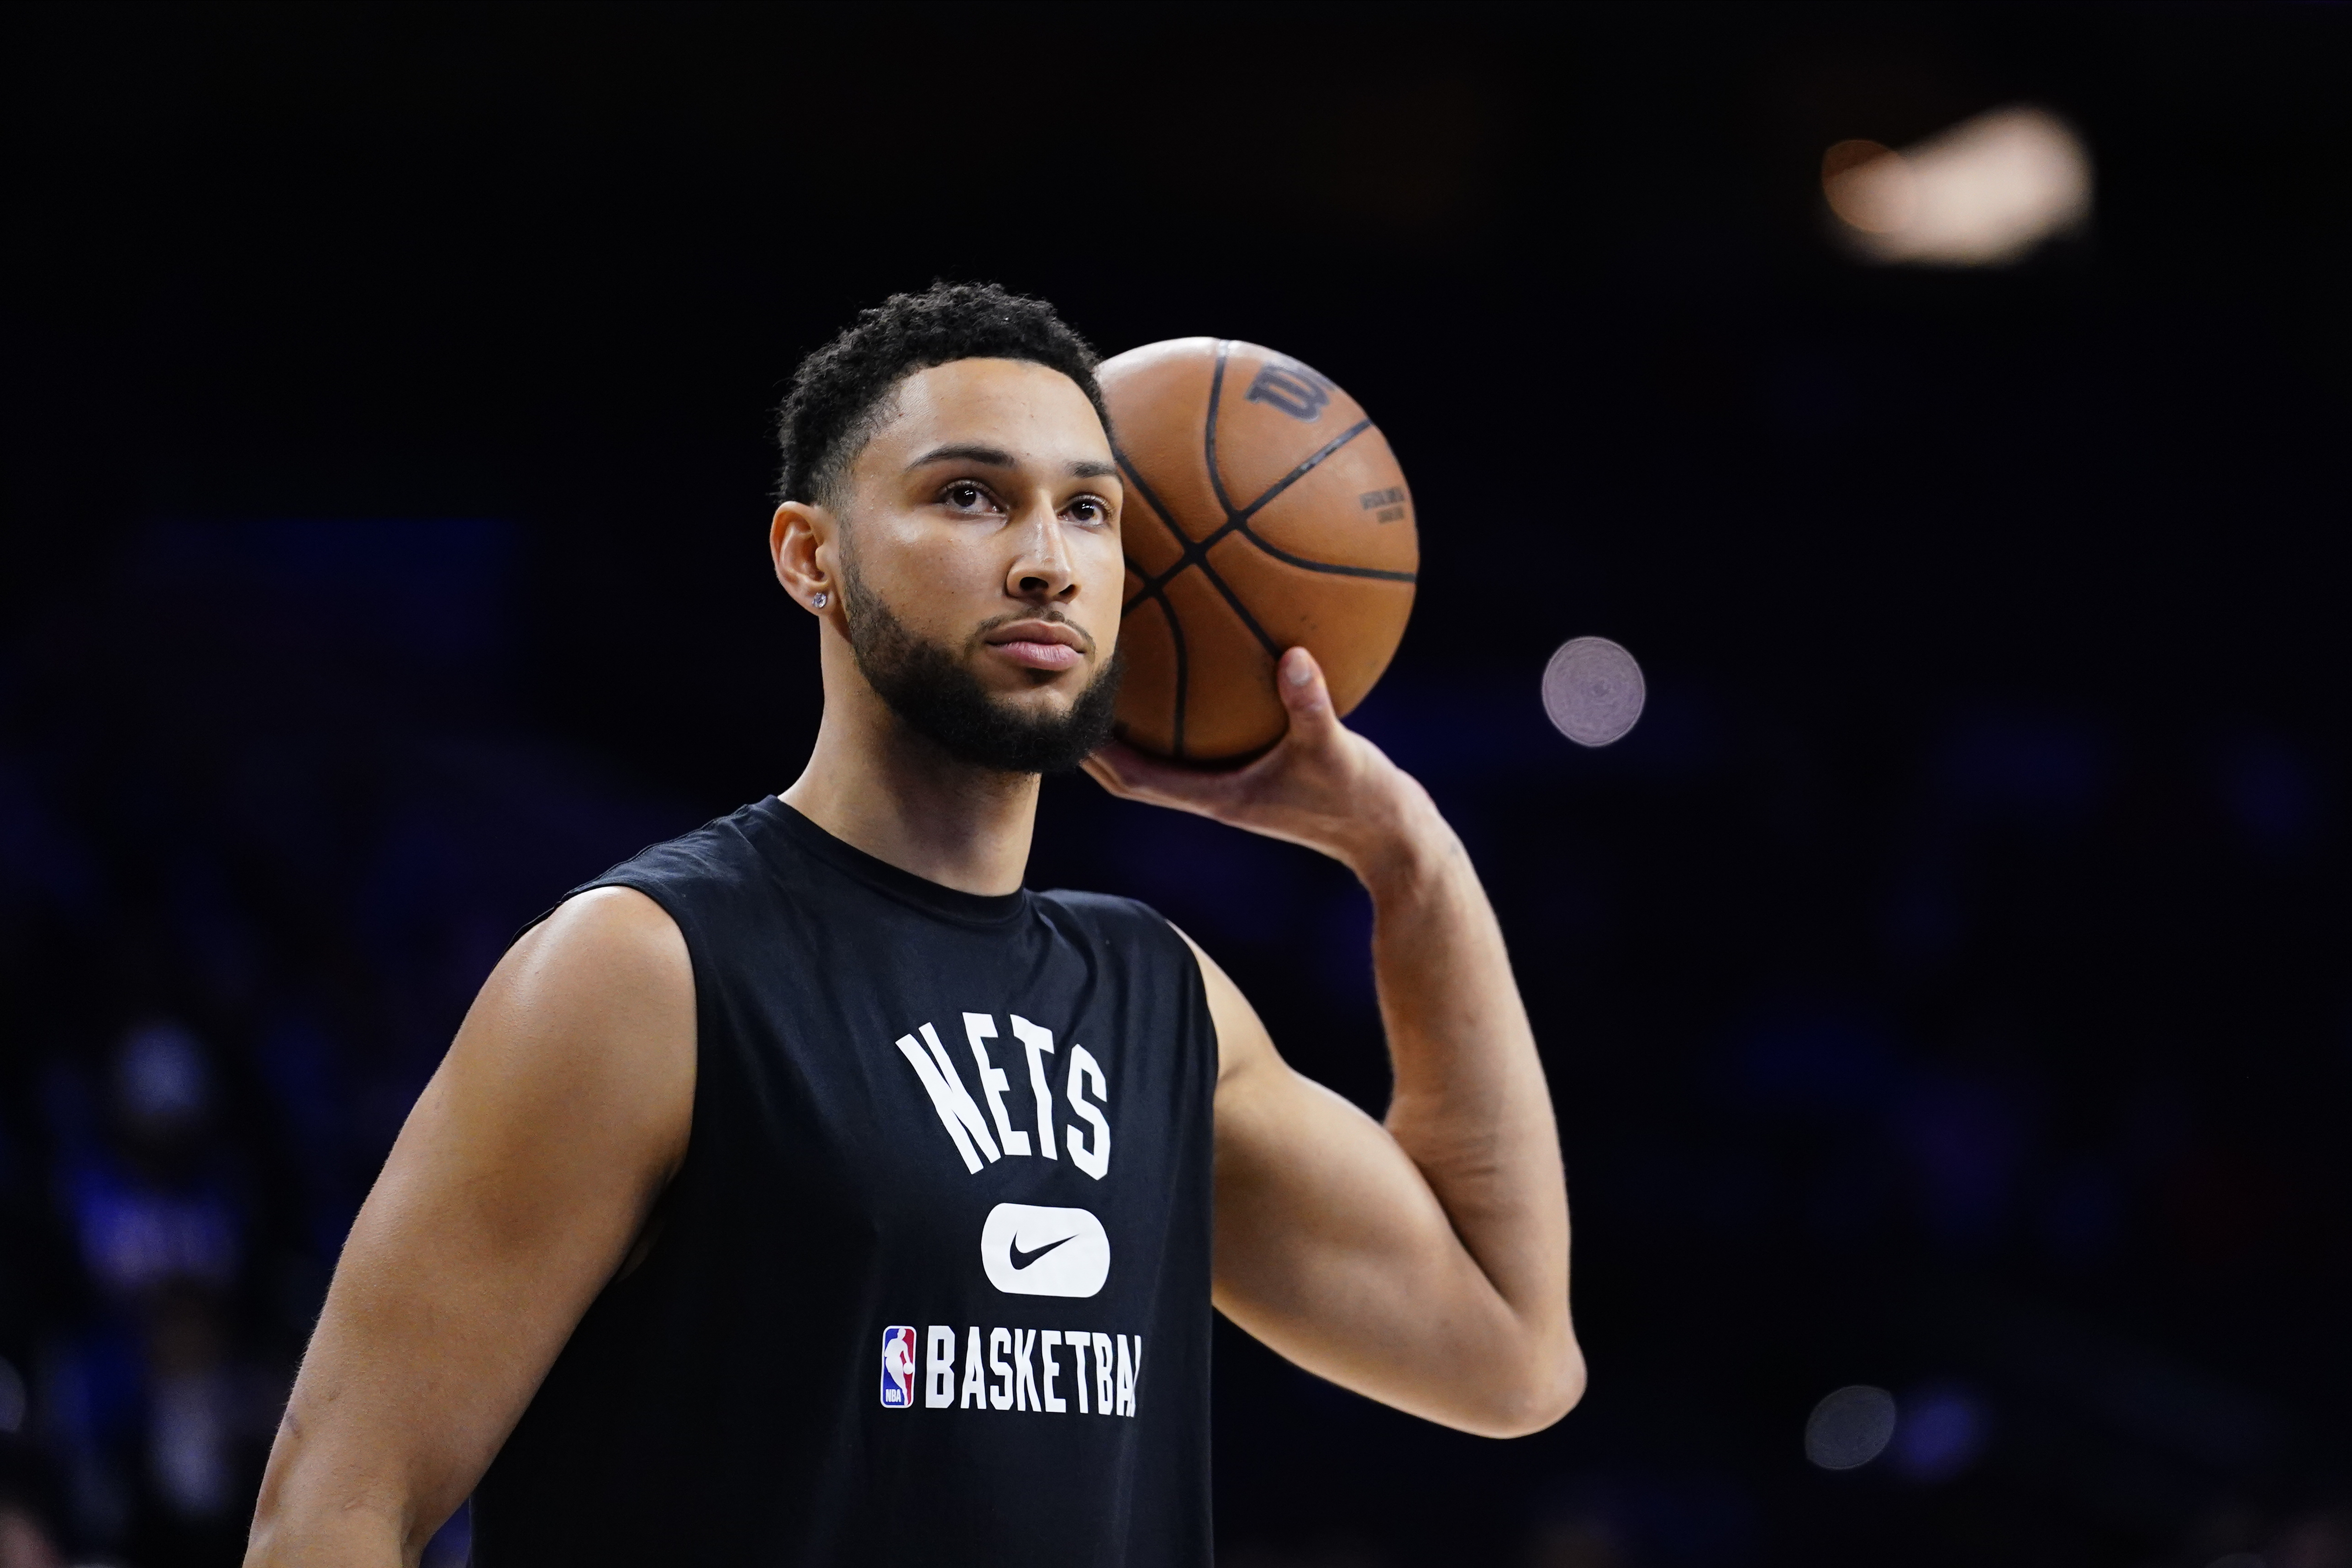 Nets' Ben Simmons listed as one of the NBA's most 'confusing' players